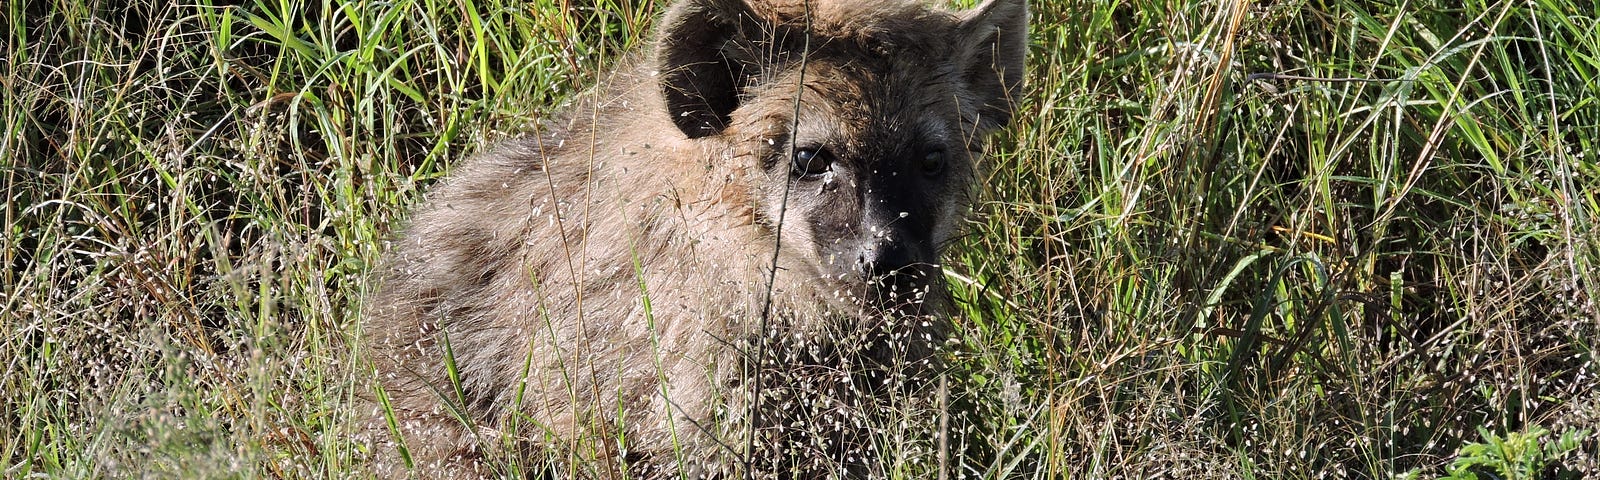 A hyaena cub stands in the green grass alone.